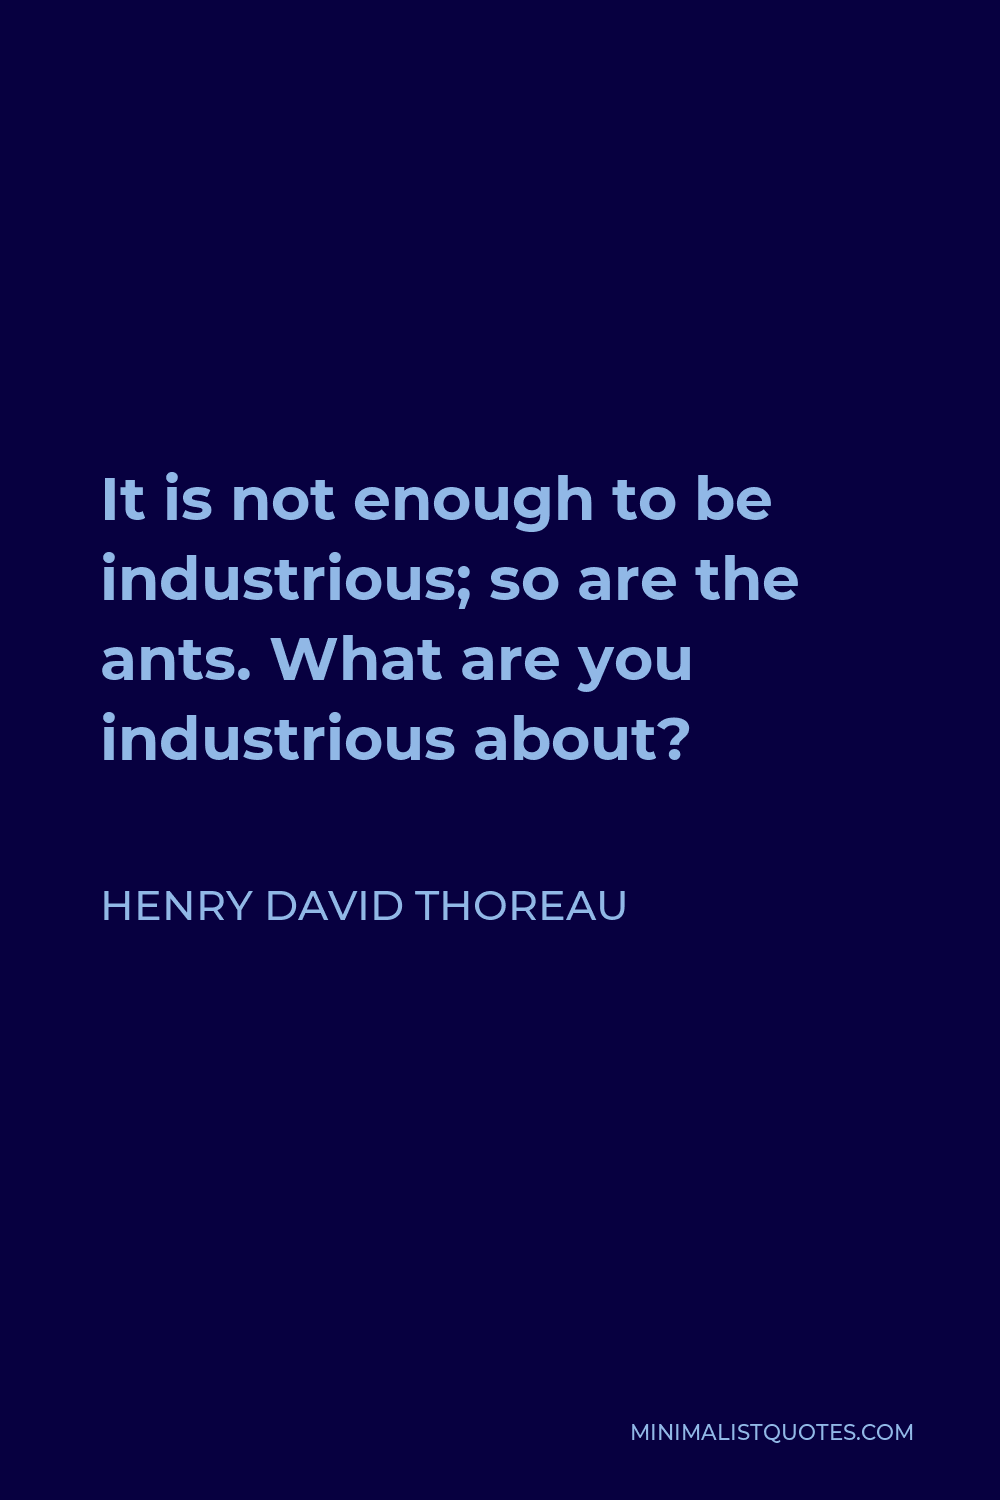 Henry David Thoreau Quote - It is not enough to be industrious; so are the ants. What are you industrious about?